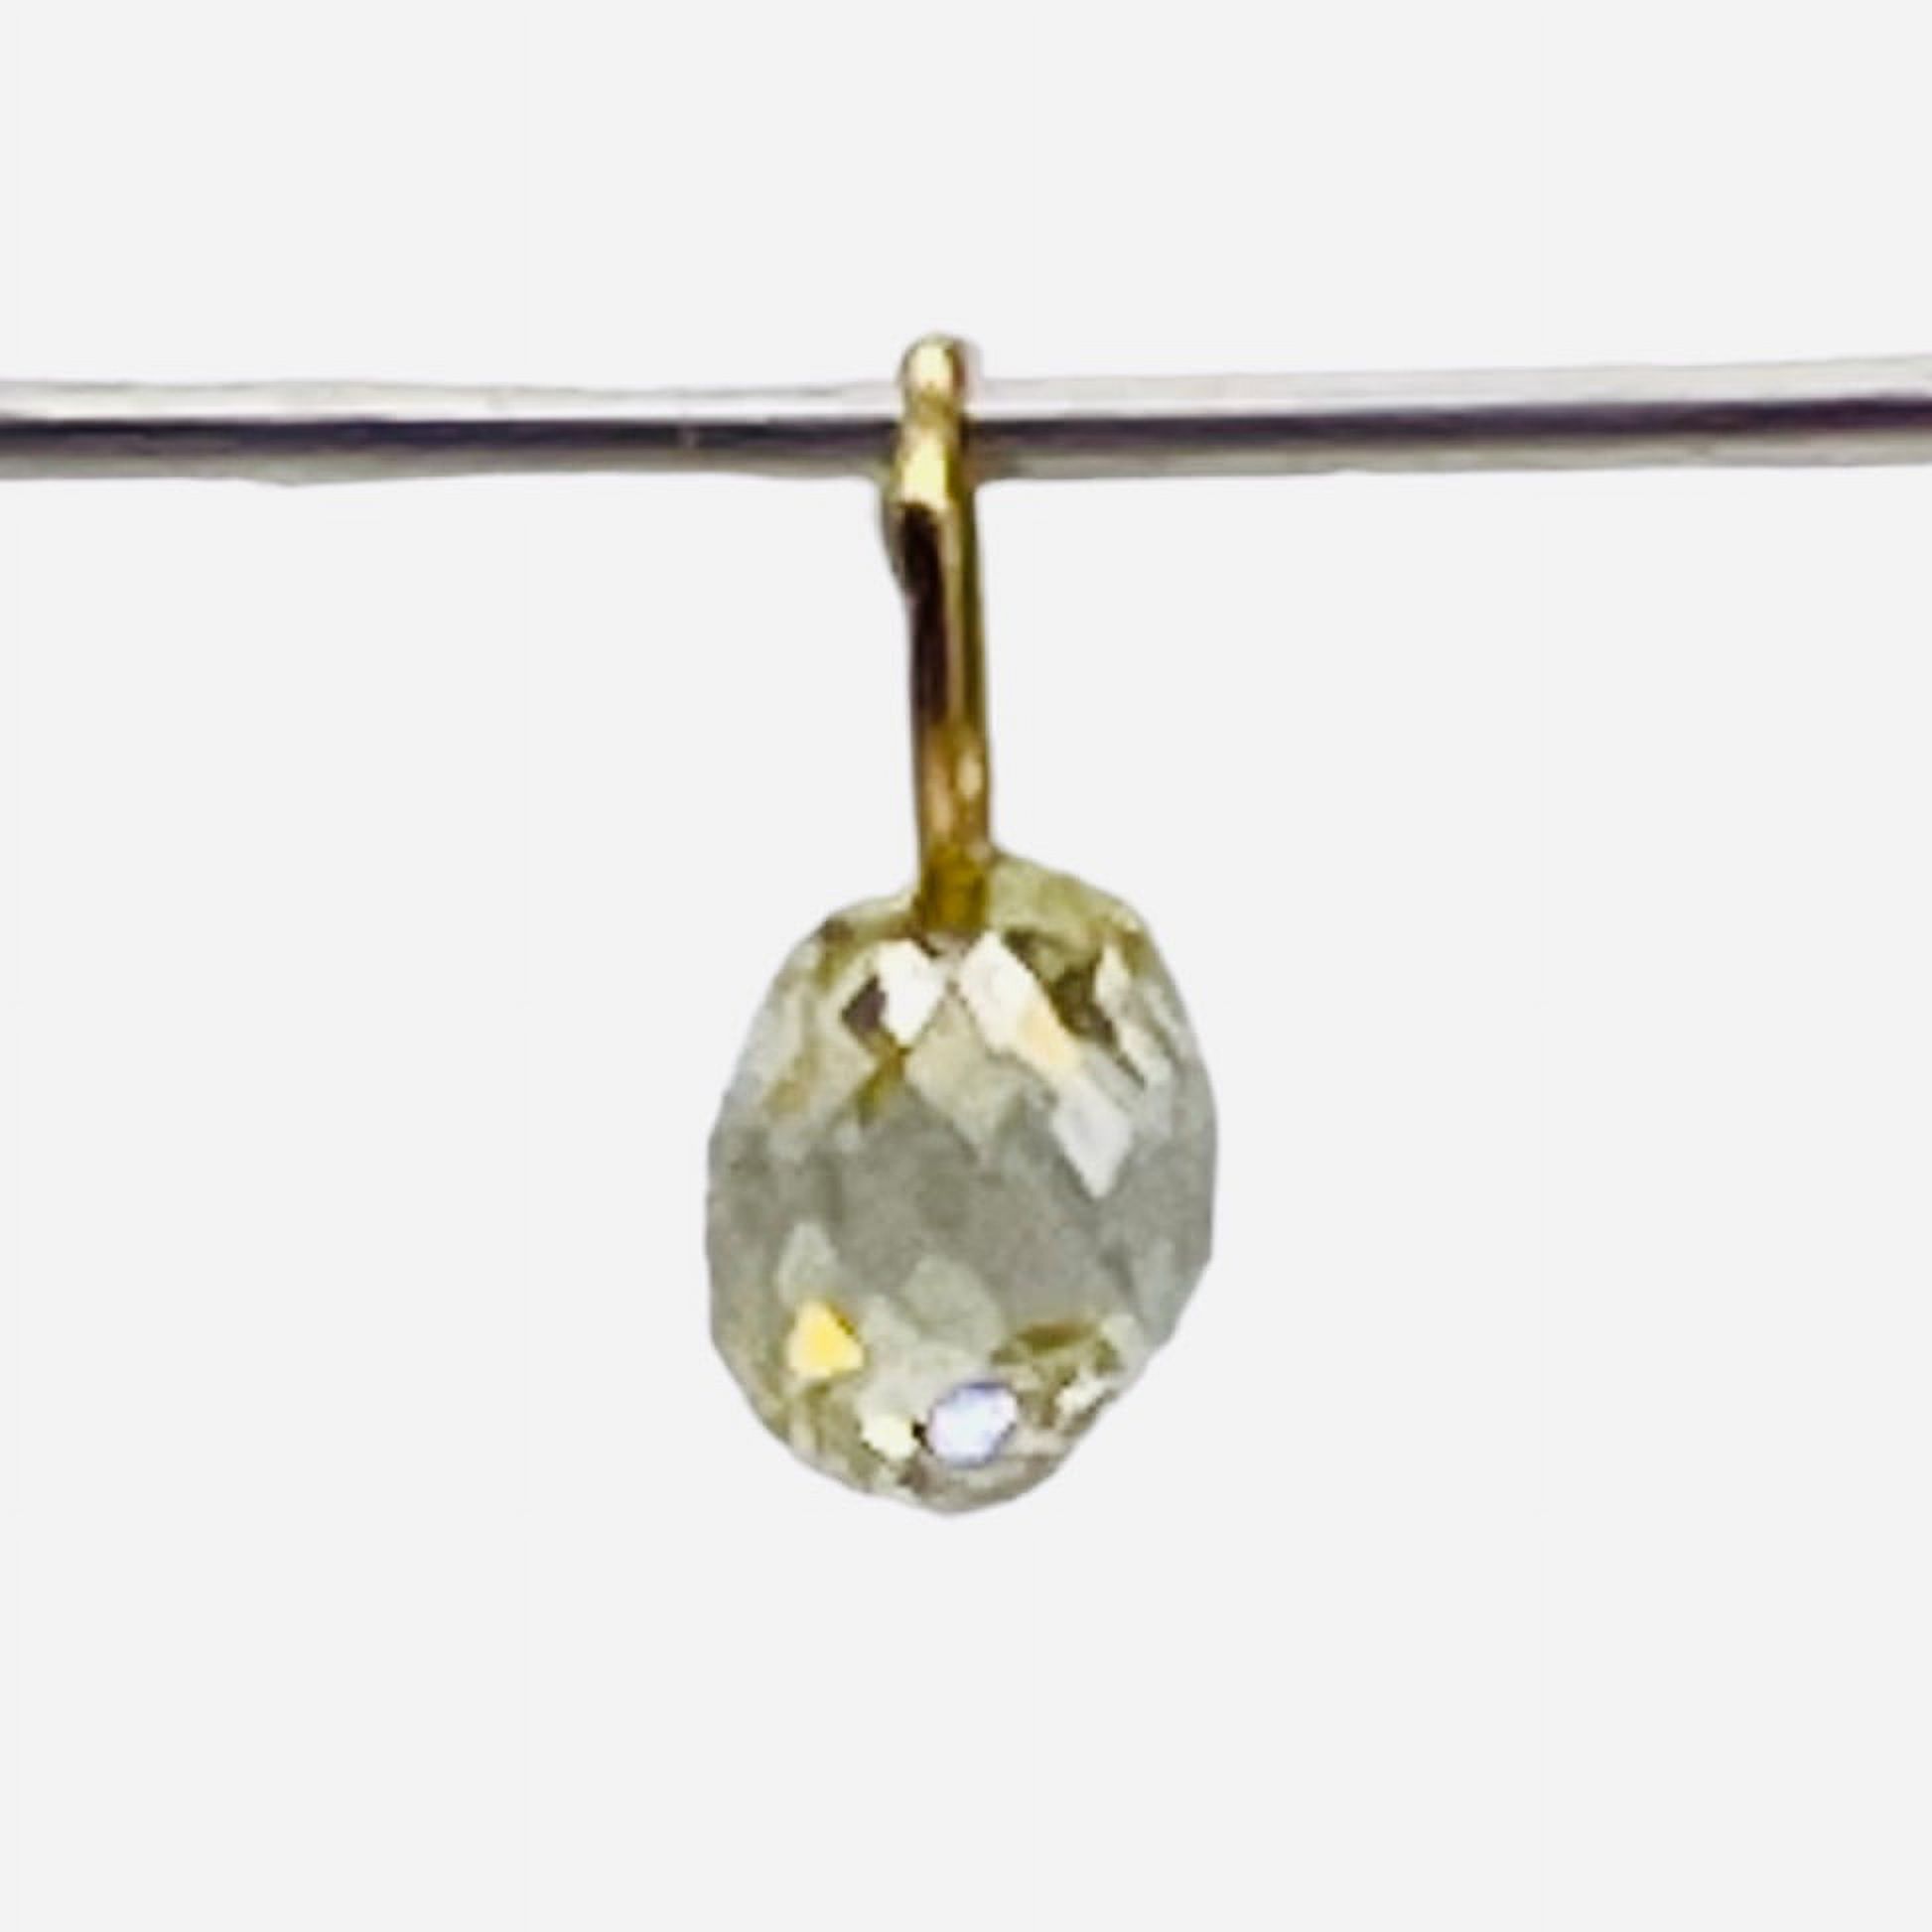 0.39cts Natural Canary Diamond 18K Gold Pendant | 4x3.25x2.75mm | - image 1 of 12